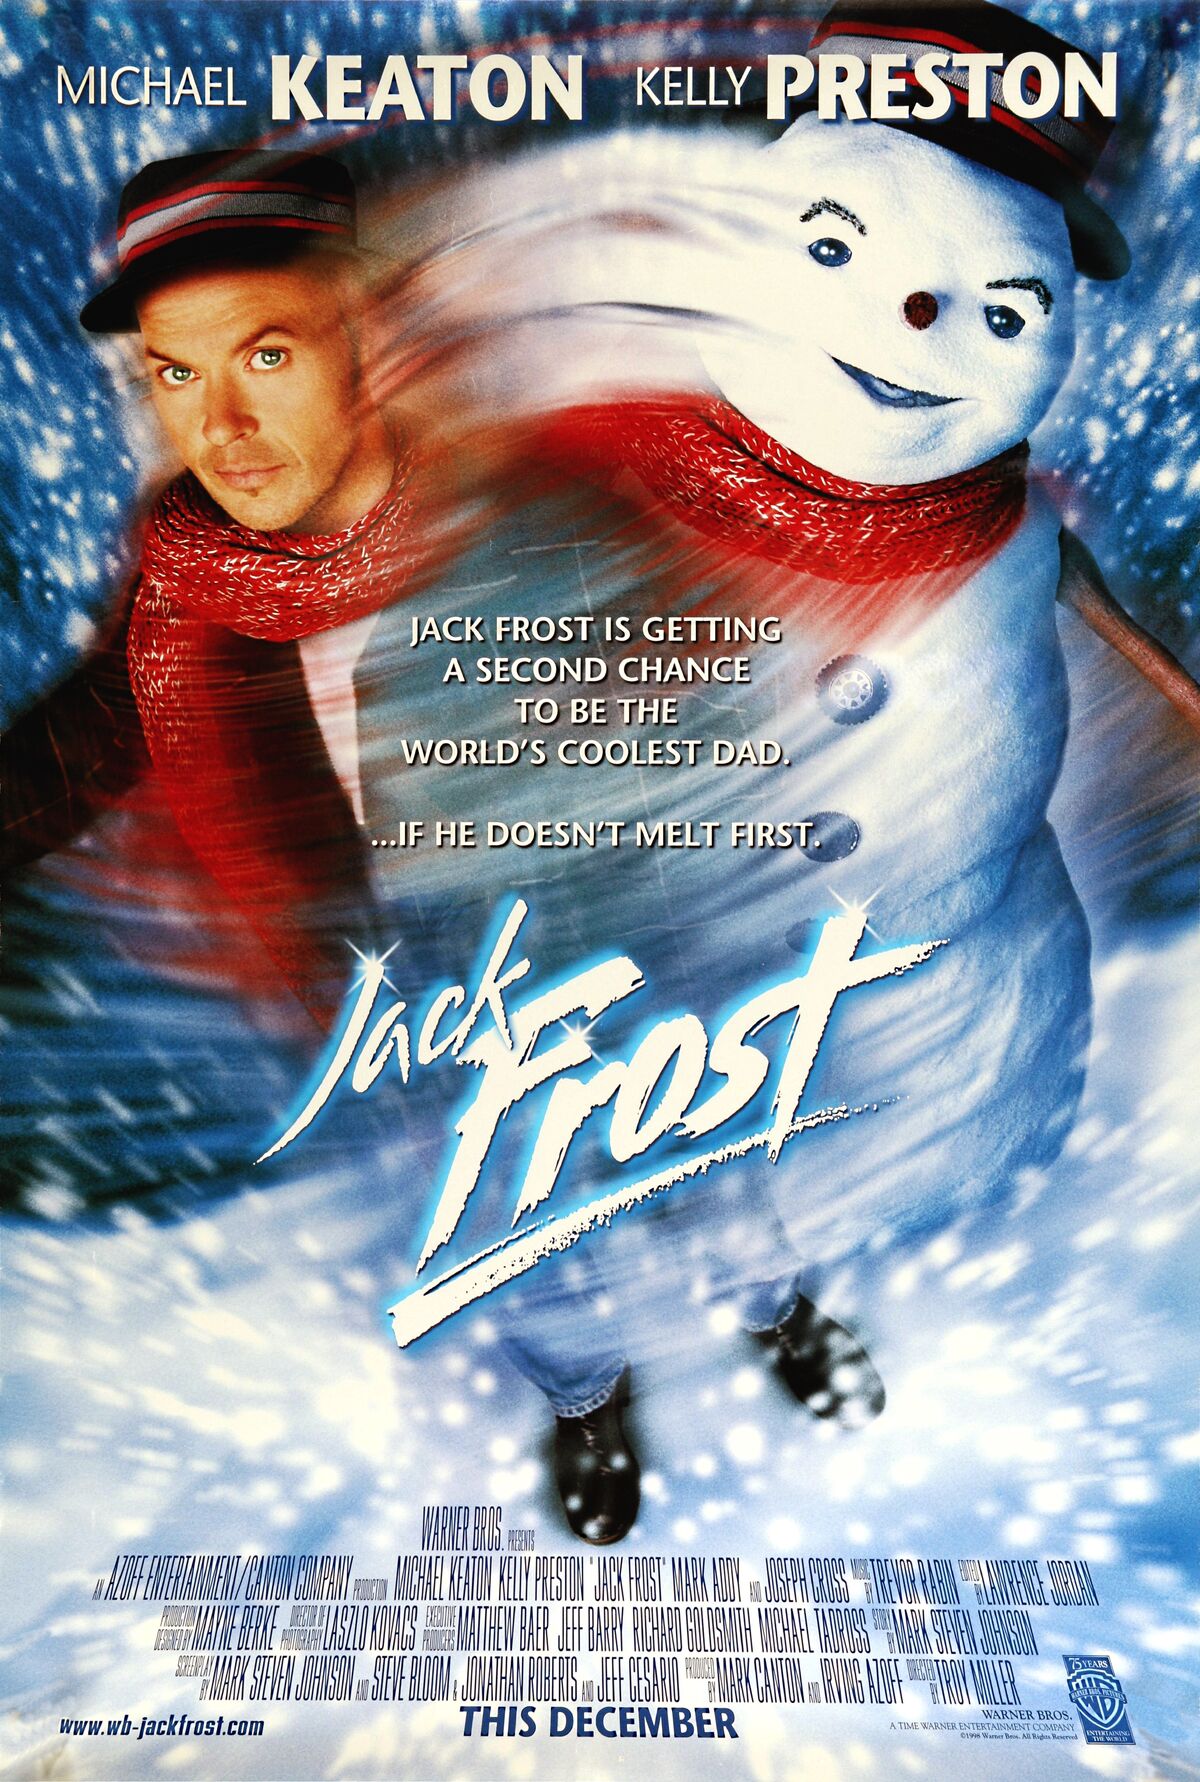 https://static.wikia.nocookie.net/warner-bros-entertainment/images/9/93/Jack-frost-movie-poster1.jpg/revision/latest/scale-to-width-down/1200?cb=20230118131339